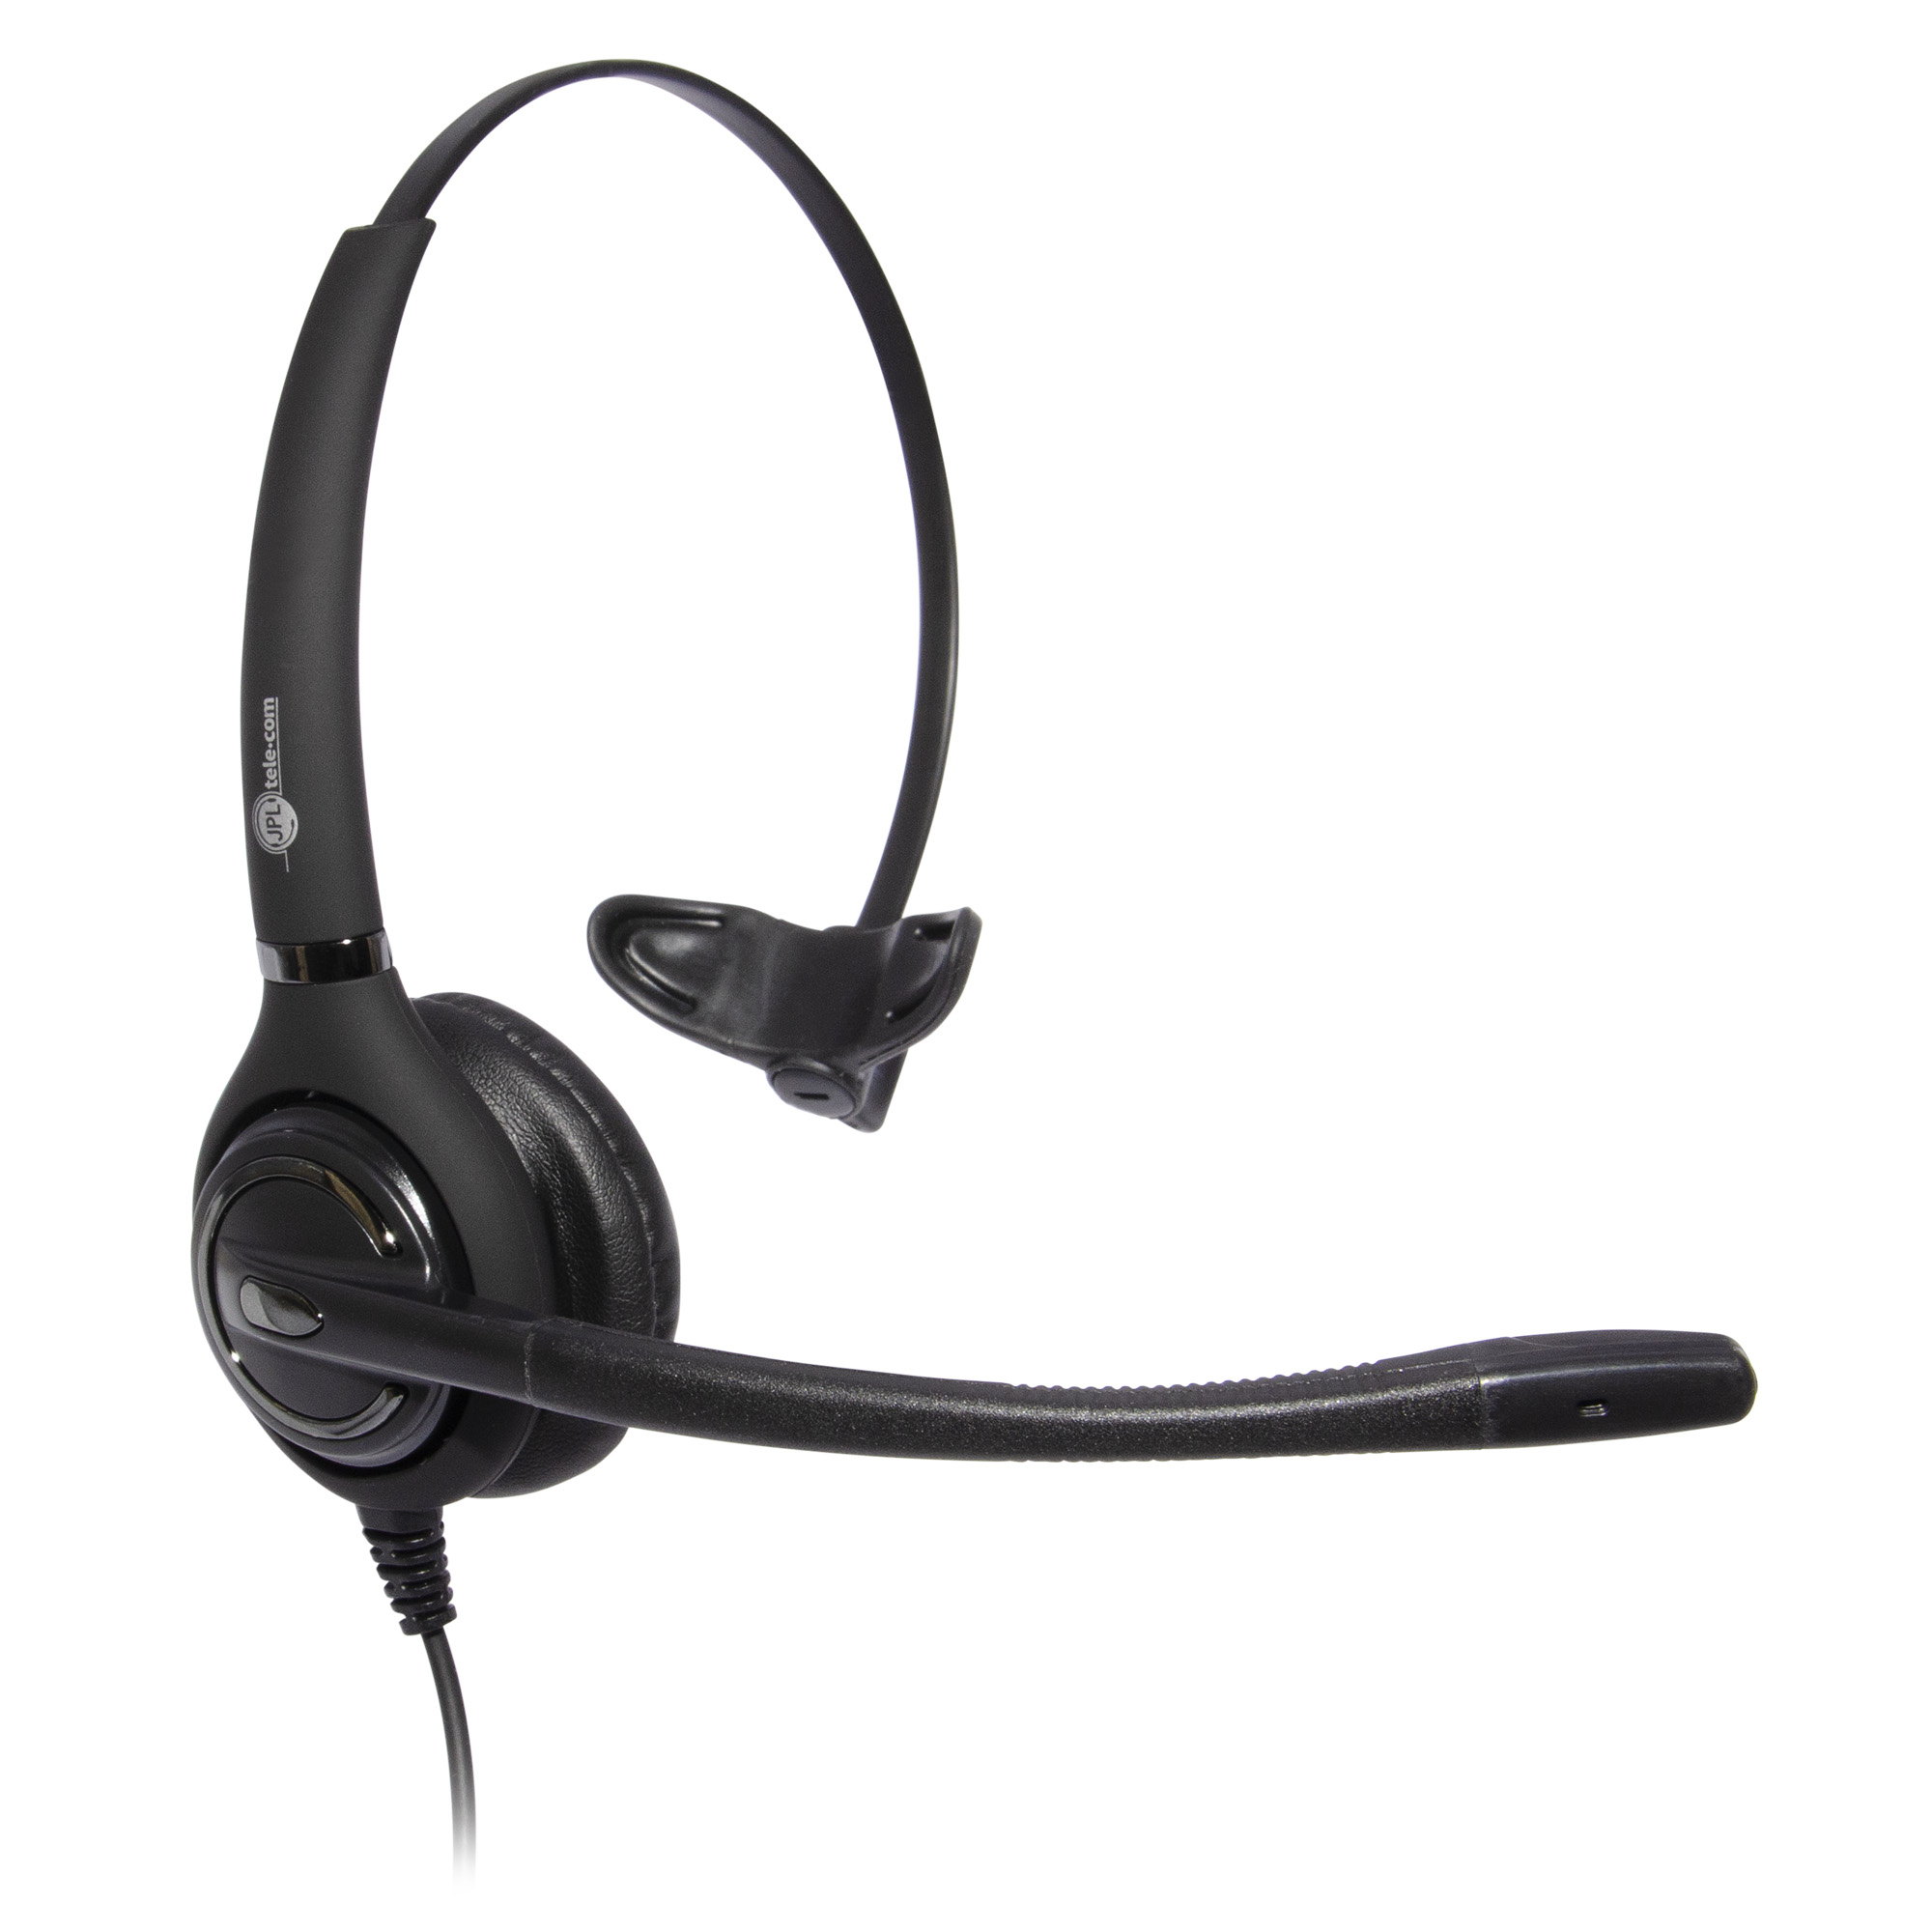 Photos - Mobile Phone Headset PLX JPL JPL-501S-PM Headset Wired Head-band Office/Call center Black, Blue 575 